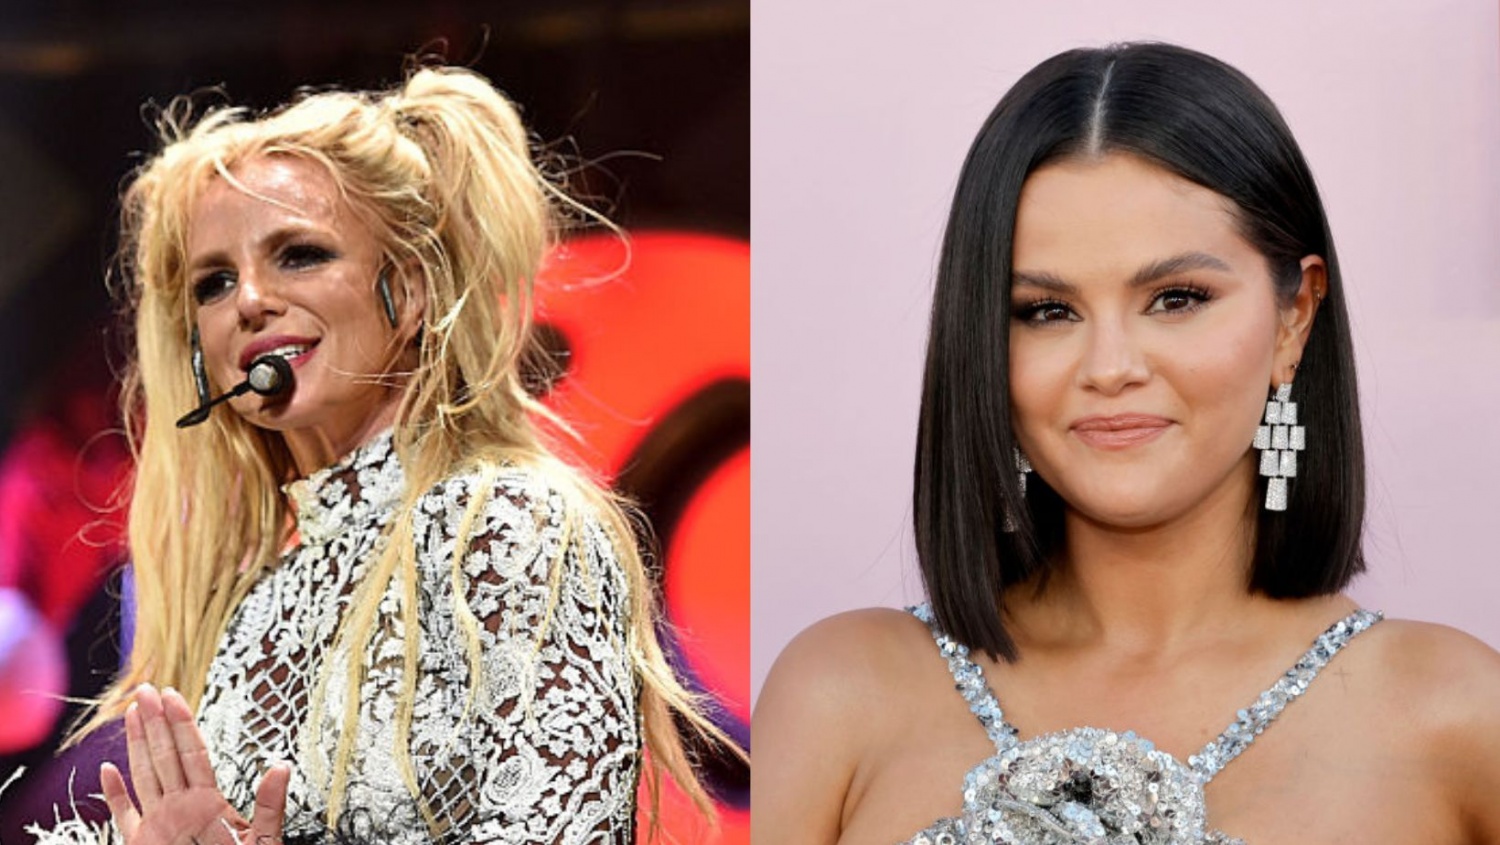 Britney Spears COPYING Selena Gomez? Singers' Alleged Feud Revisited